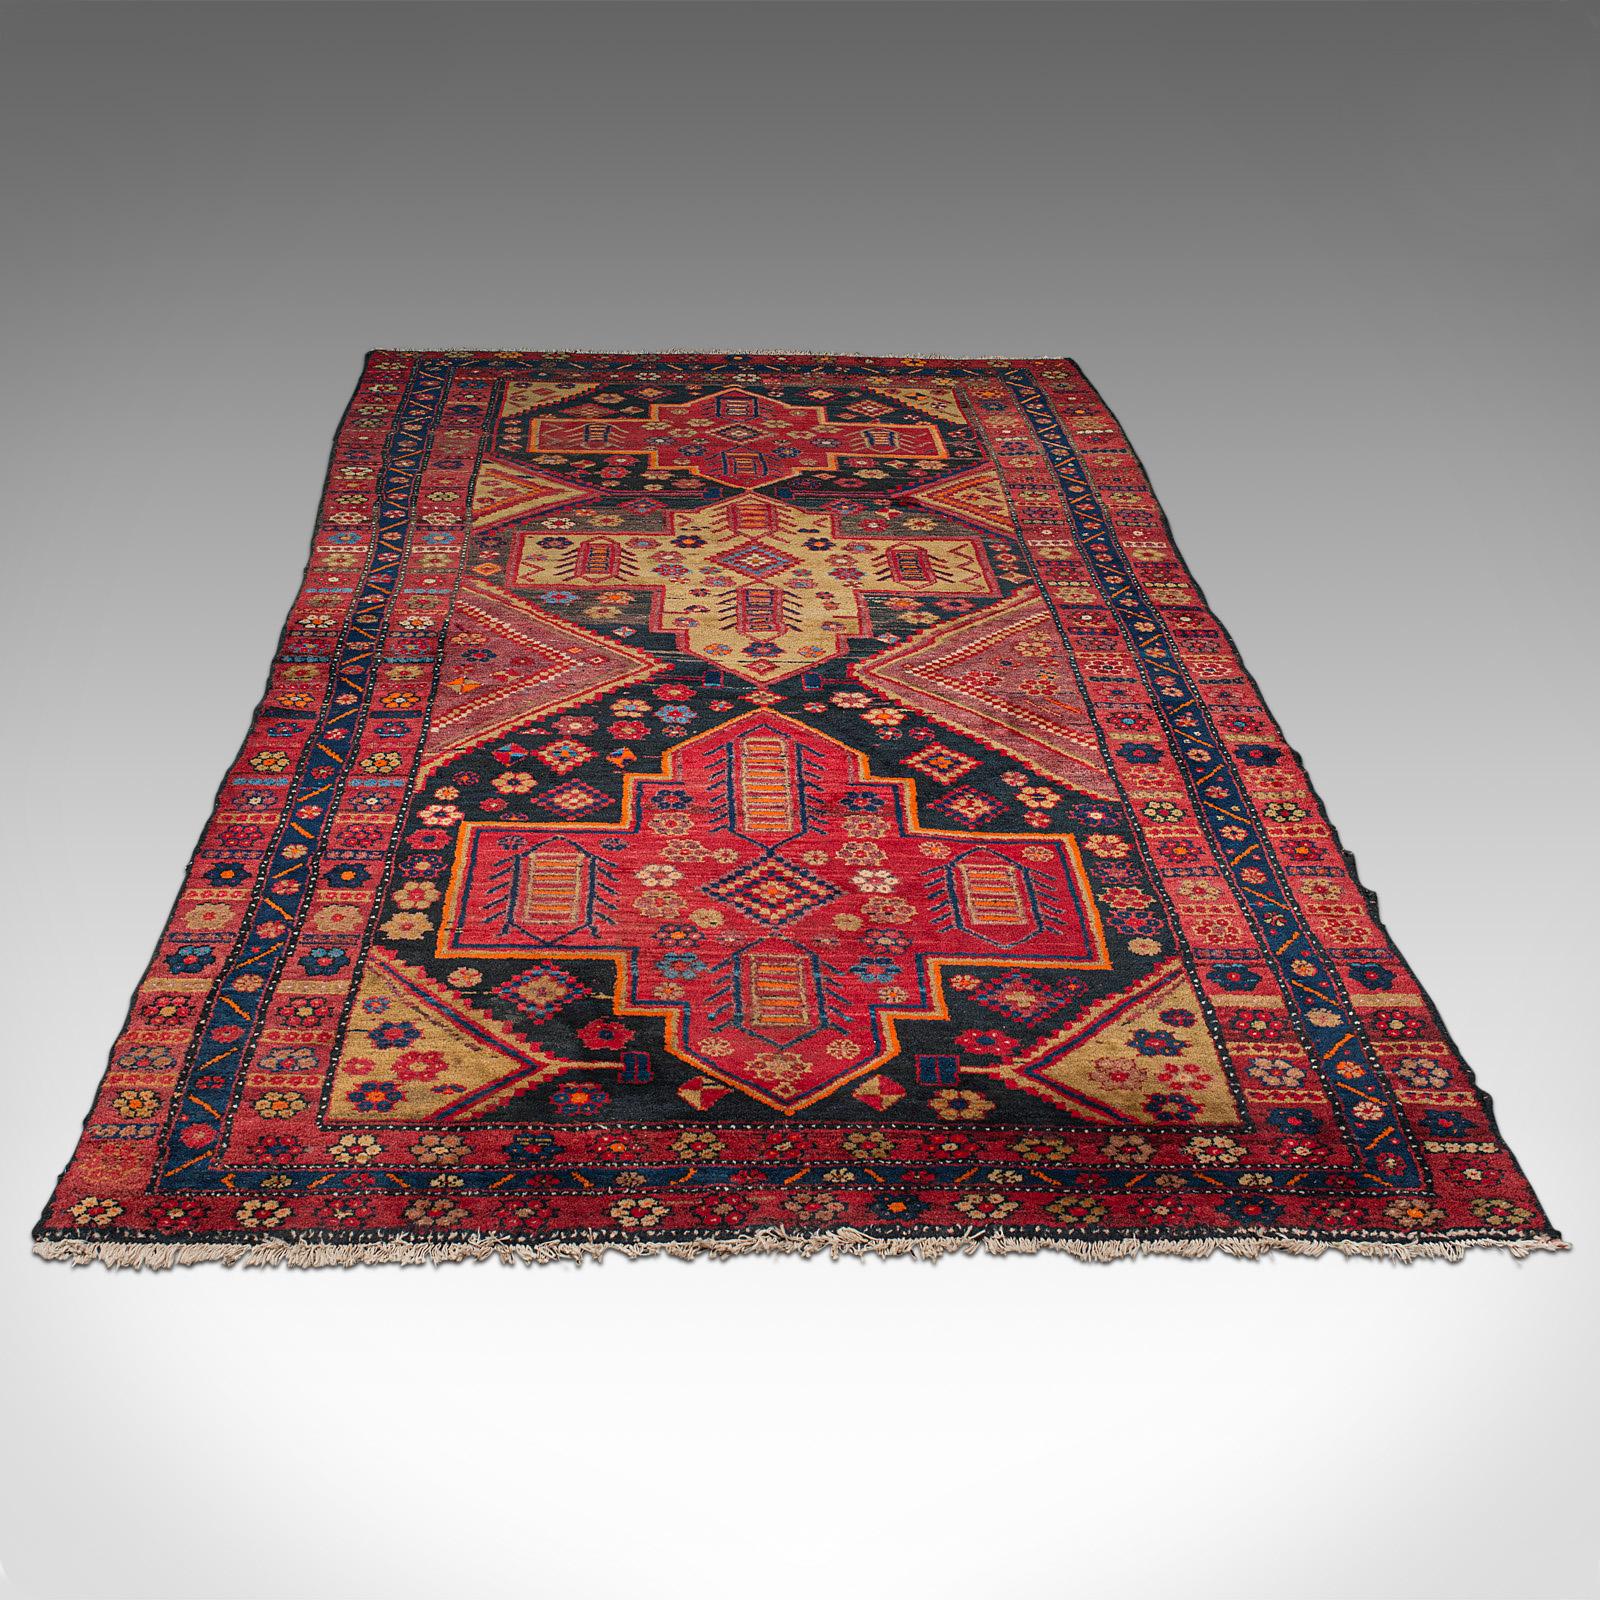 This is a vintage Shiraz decorative rug. A Persian, woven hall or lounge carpet, dating to the mid 20th century, circa 1940.

Of useful, near Qali size at 162cm x 305cm (63.75